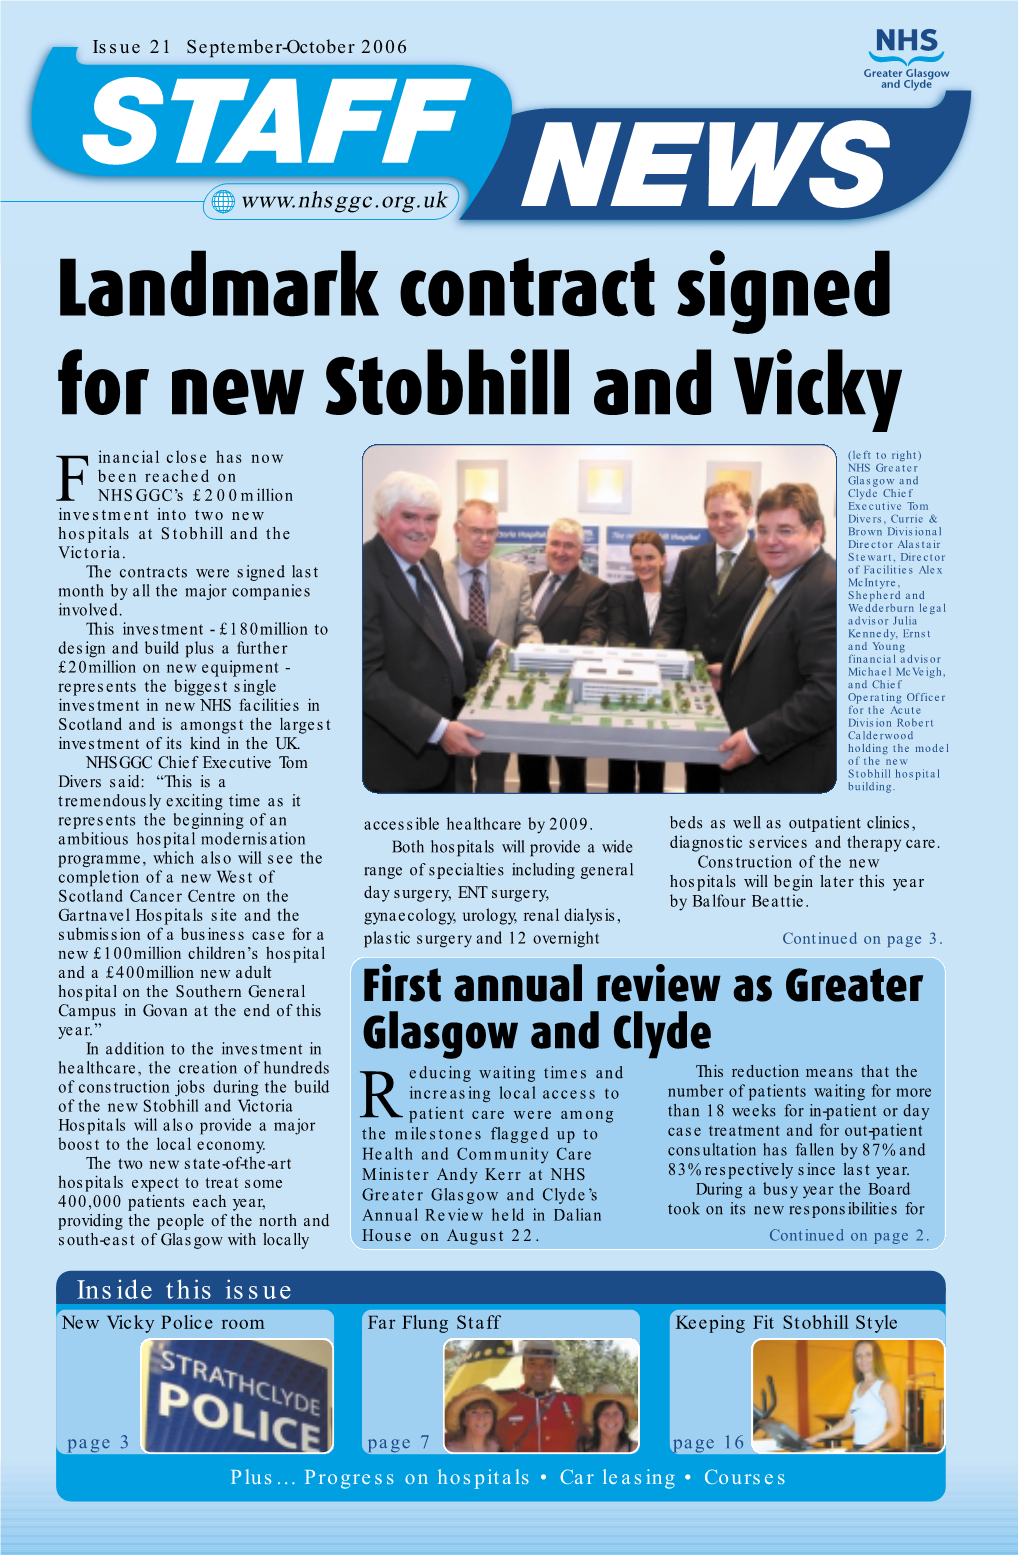 Landmark Contract Signed for New Stobhill and Vicky